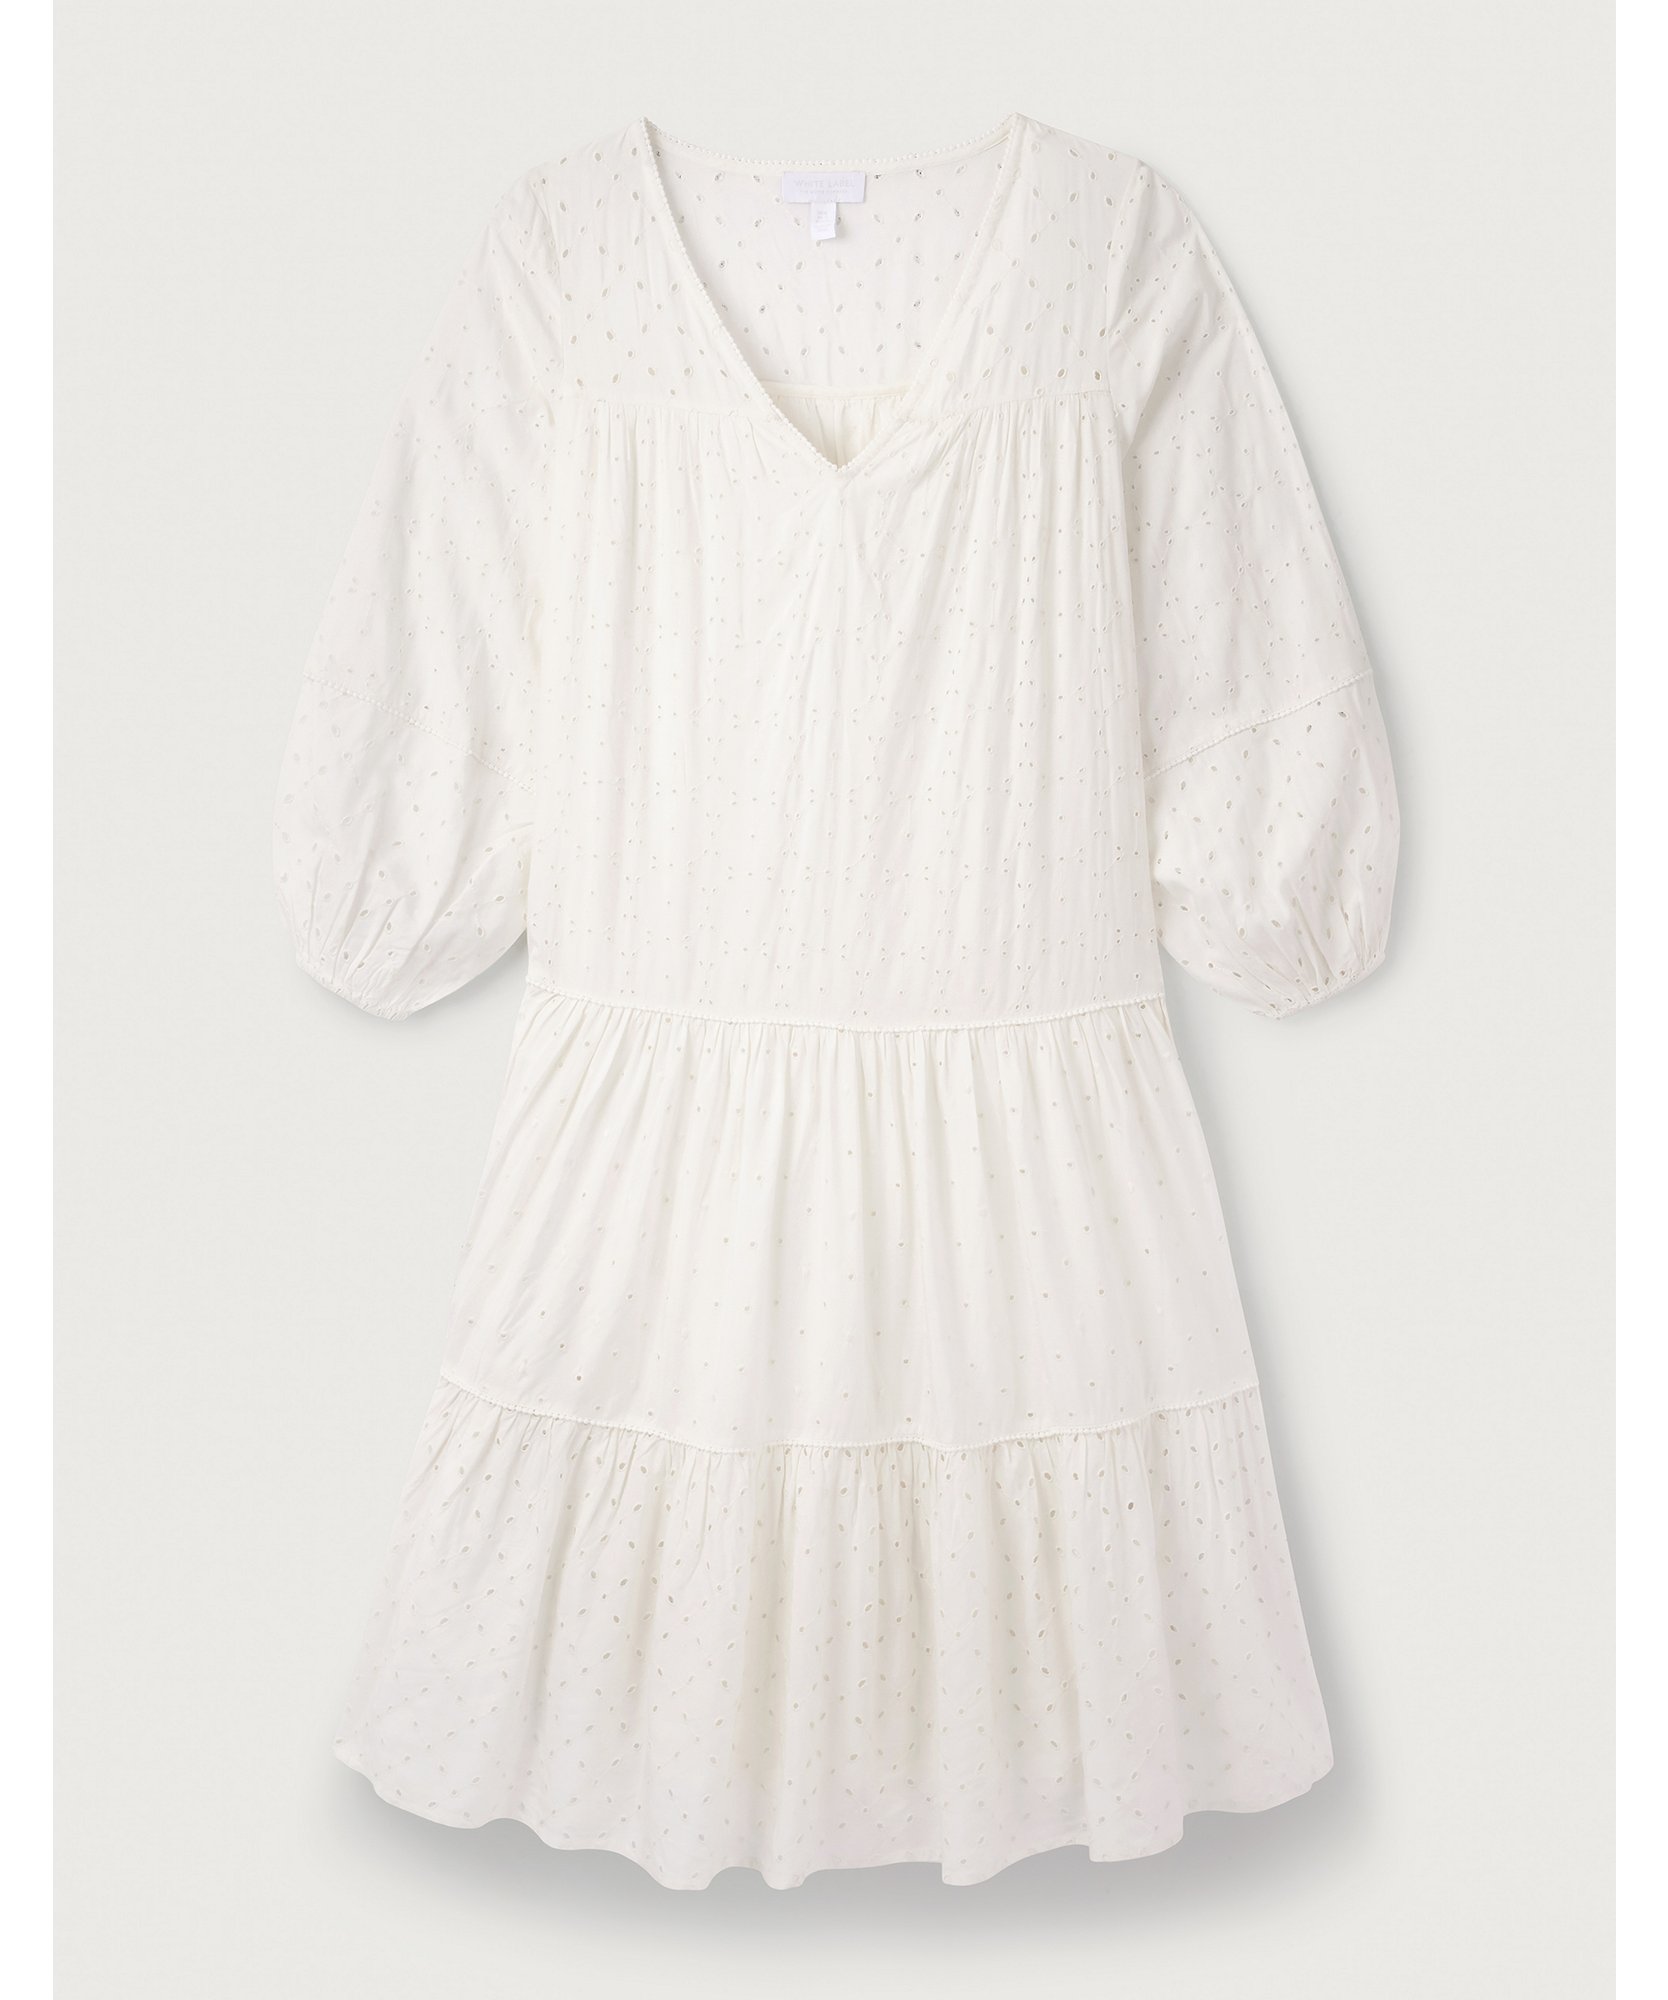 Tiered Broderie Midi Dress | Dresses & Skirts | The White Company US